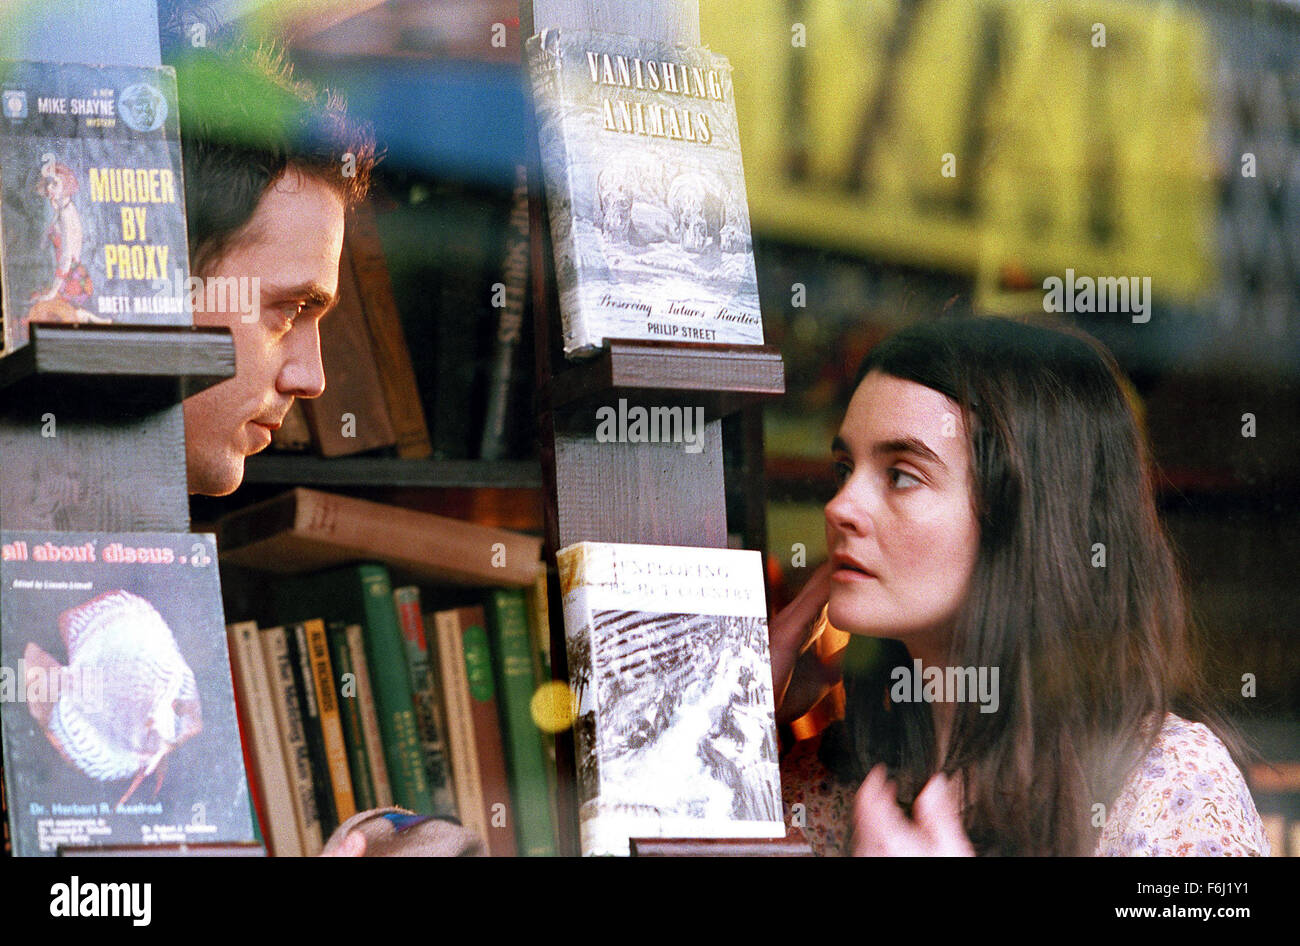 Nov 08, 2002; Glasgow, Scotland, UK; JAMIE SIVES and SHIRLEY HENDERSON star as Wilbur and Alice in the comedy drama 'Wilbur Wants to Kill Himself' directed by Lone Scherfig. Stock Photo